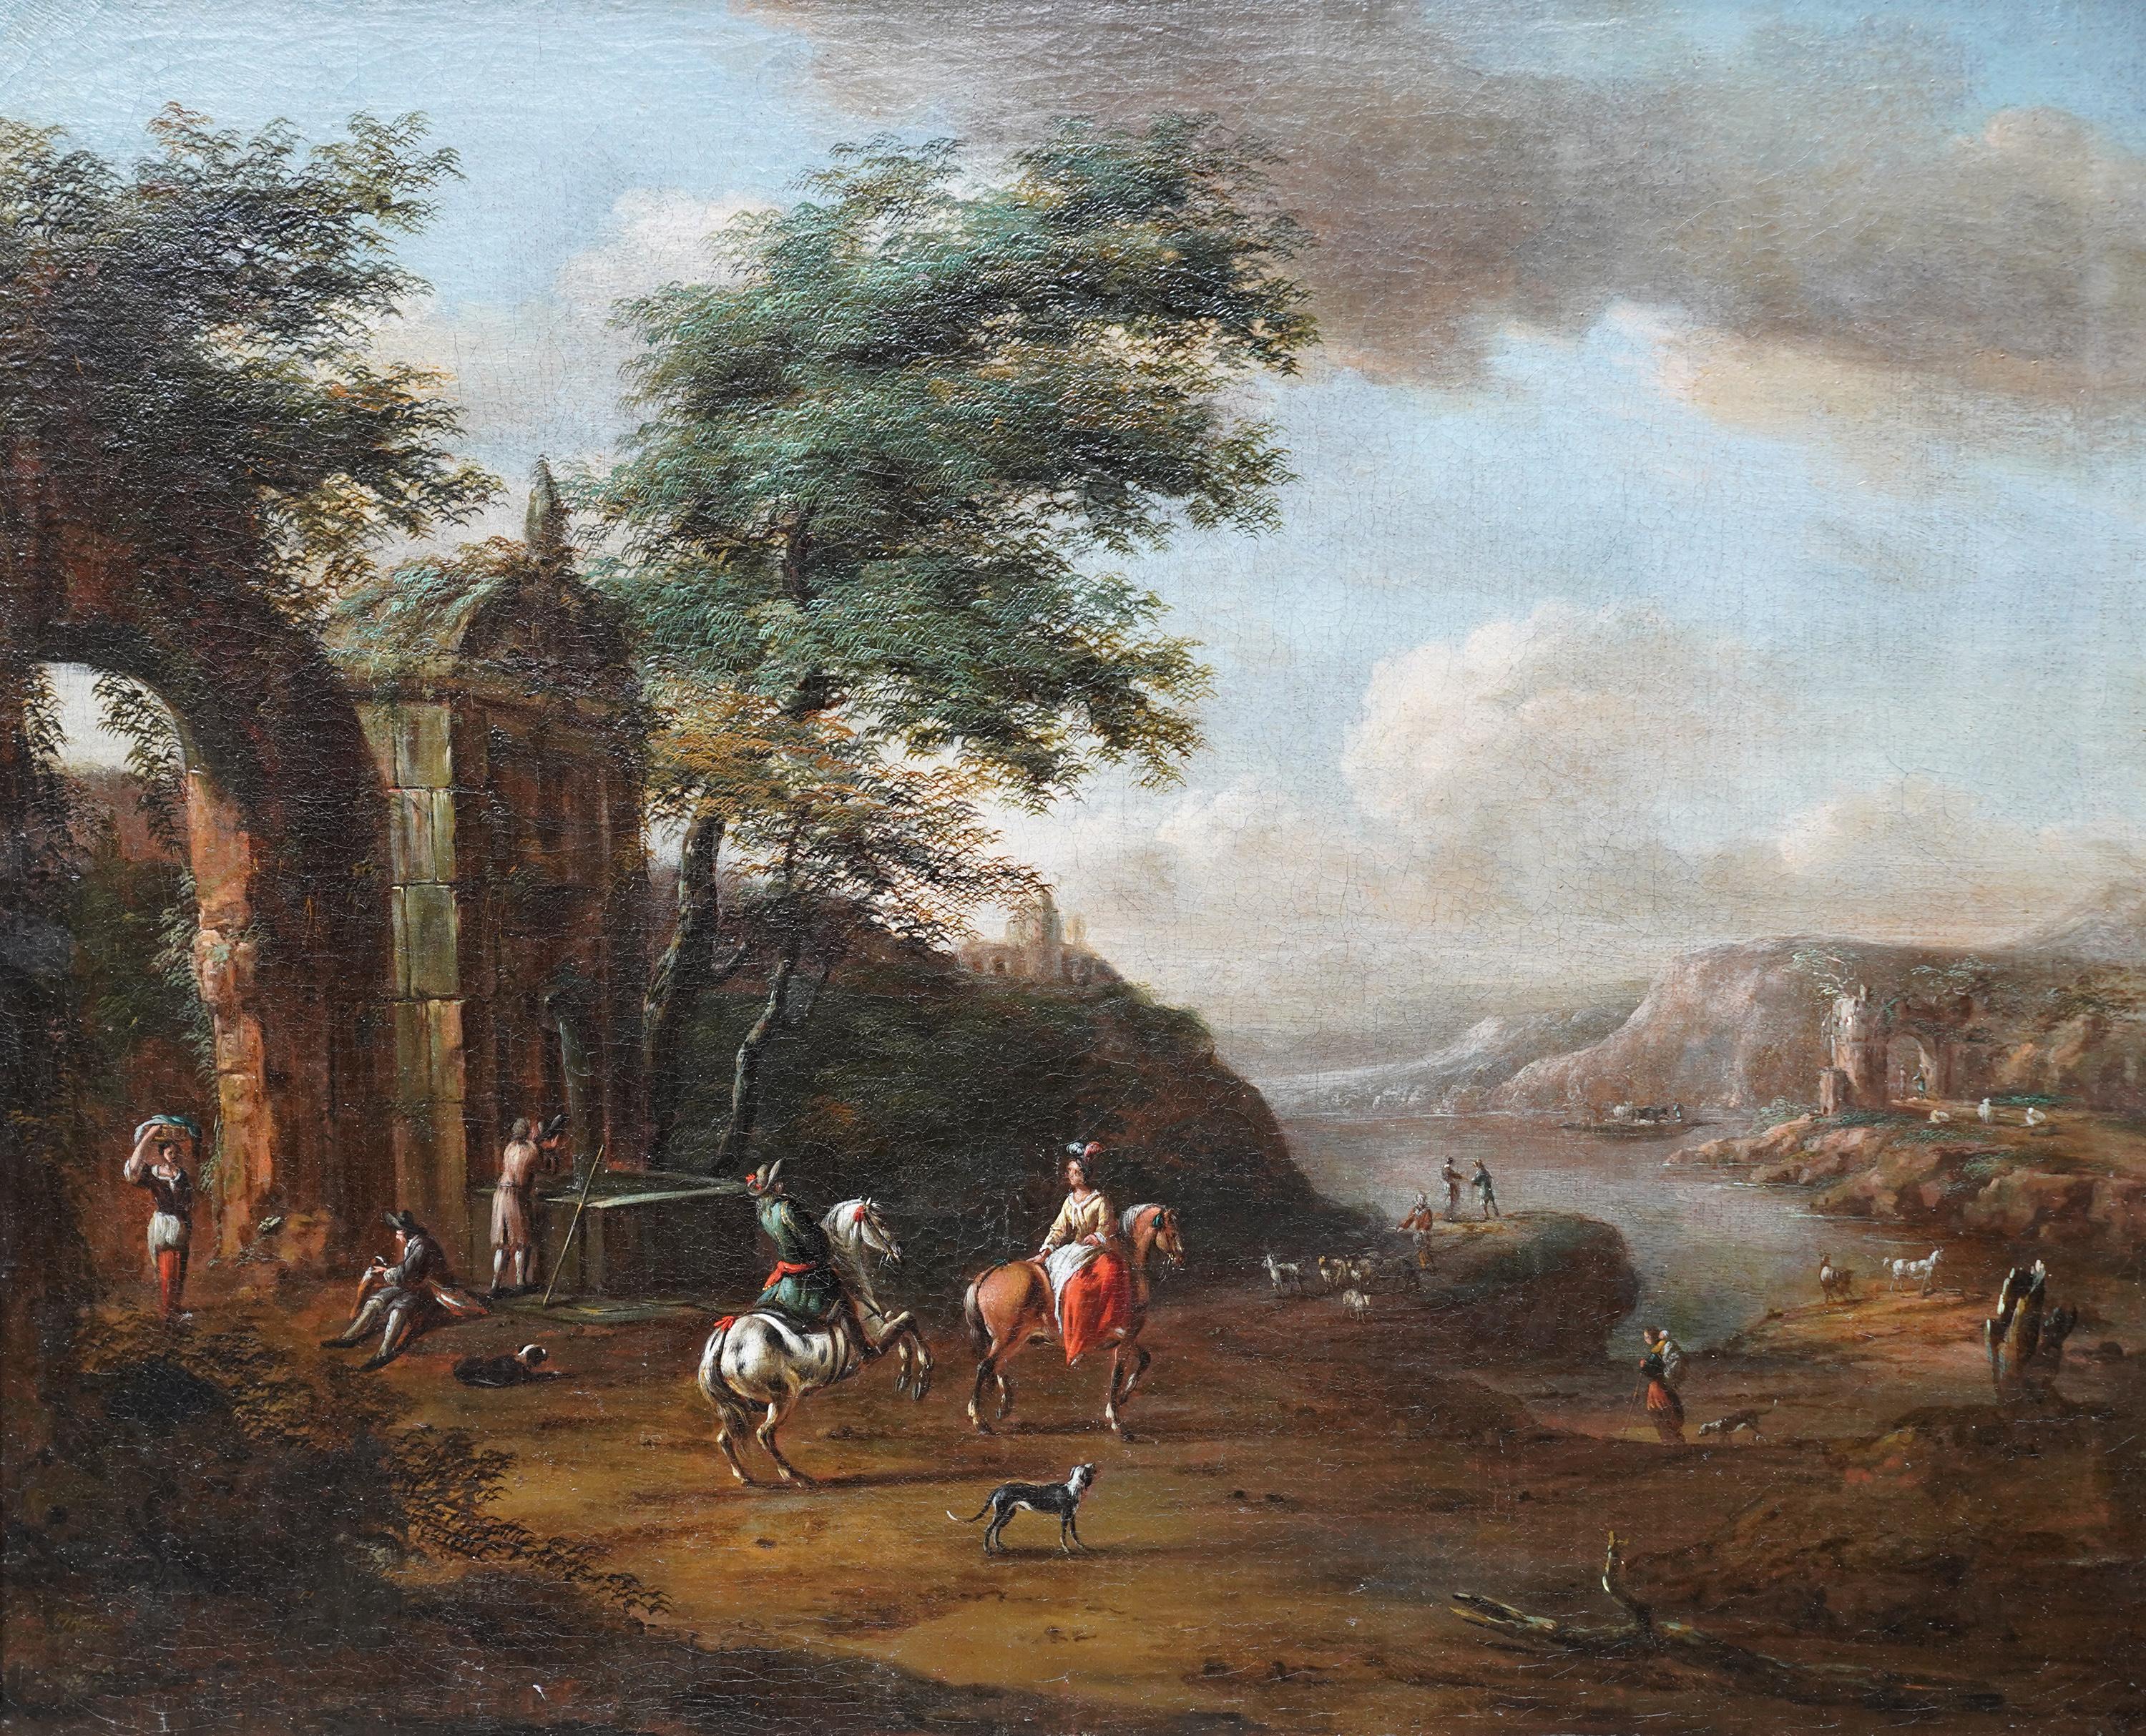 Travellers near Ruins in a Landscape - Dutch Old Master art figural oil painting - Painting by Pieter Wouwerman